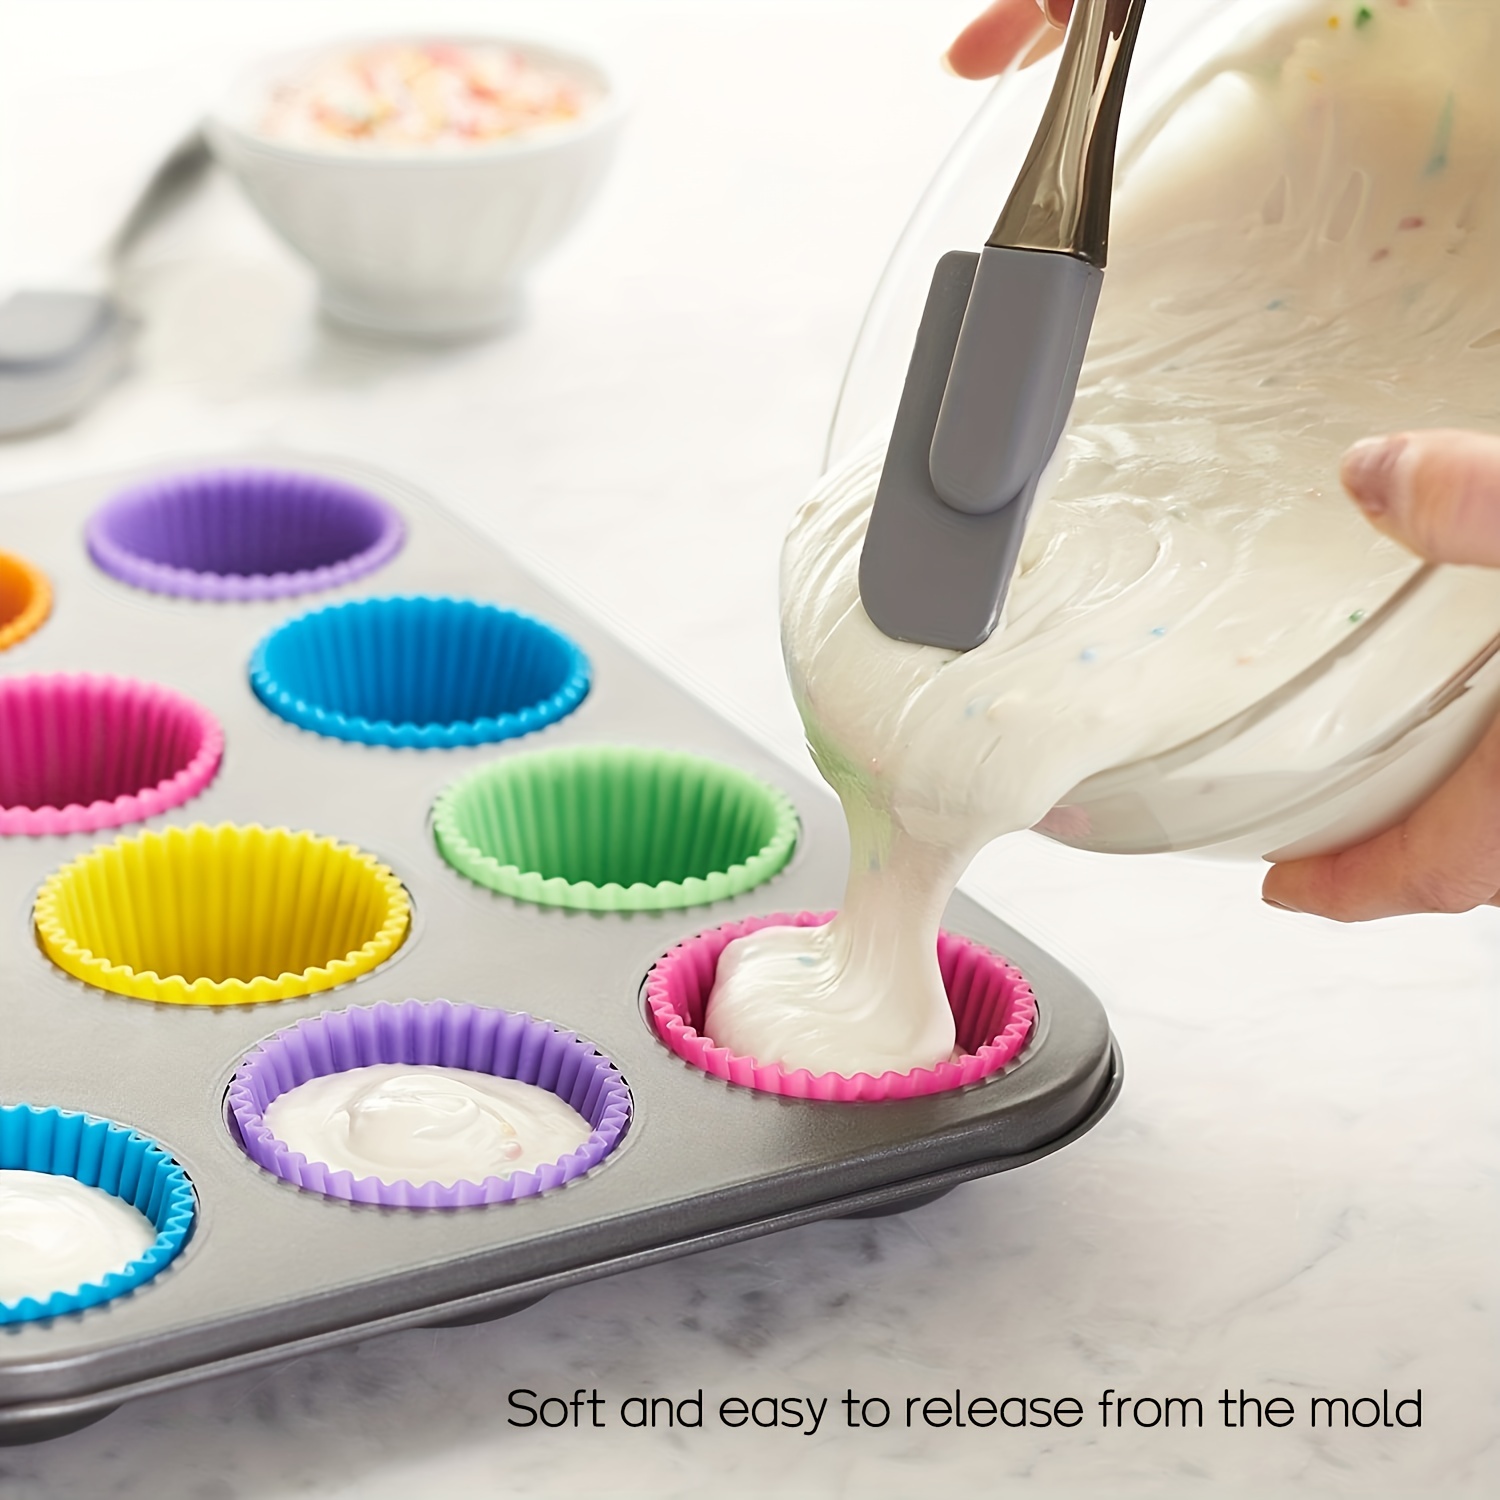 Reusable Silicone Baking Cups - AIGP1077 - IdeaStage Promotional Products